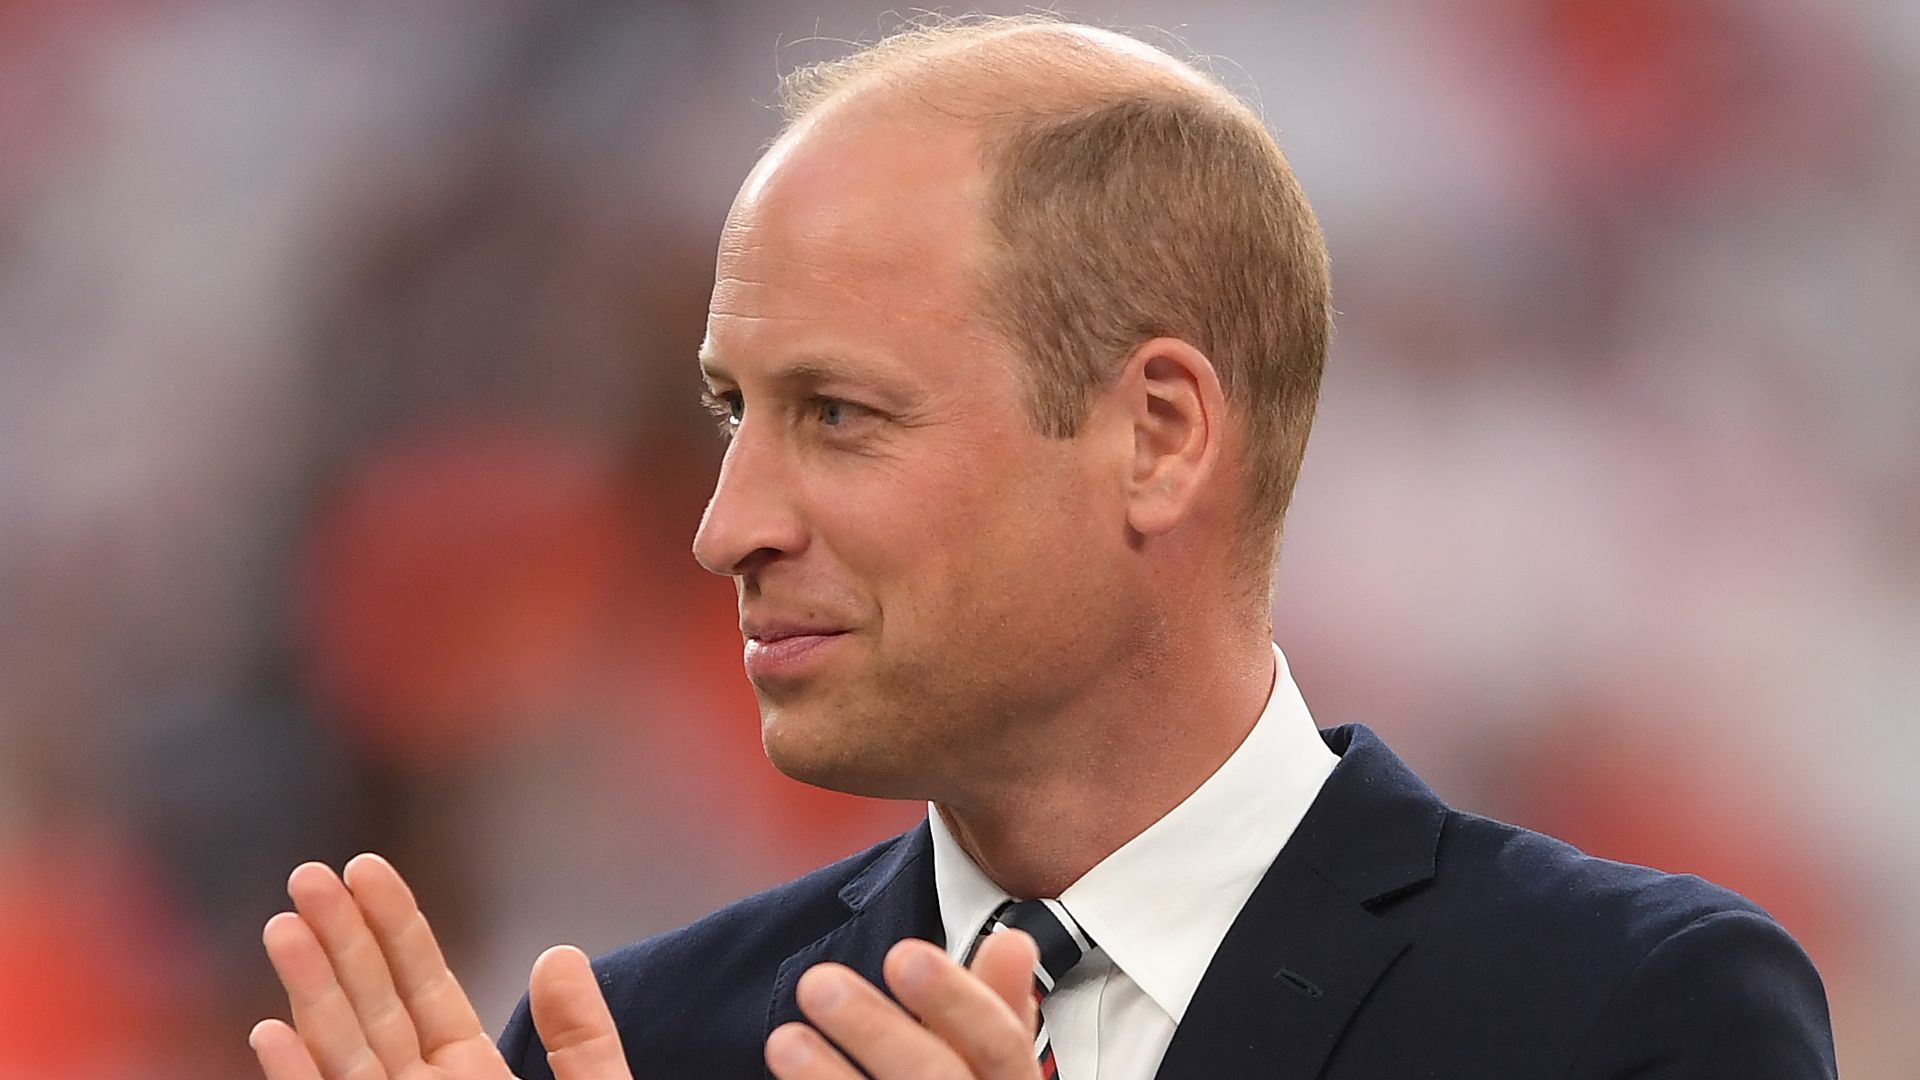 Prince William at the Women's Euro 2022 final match